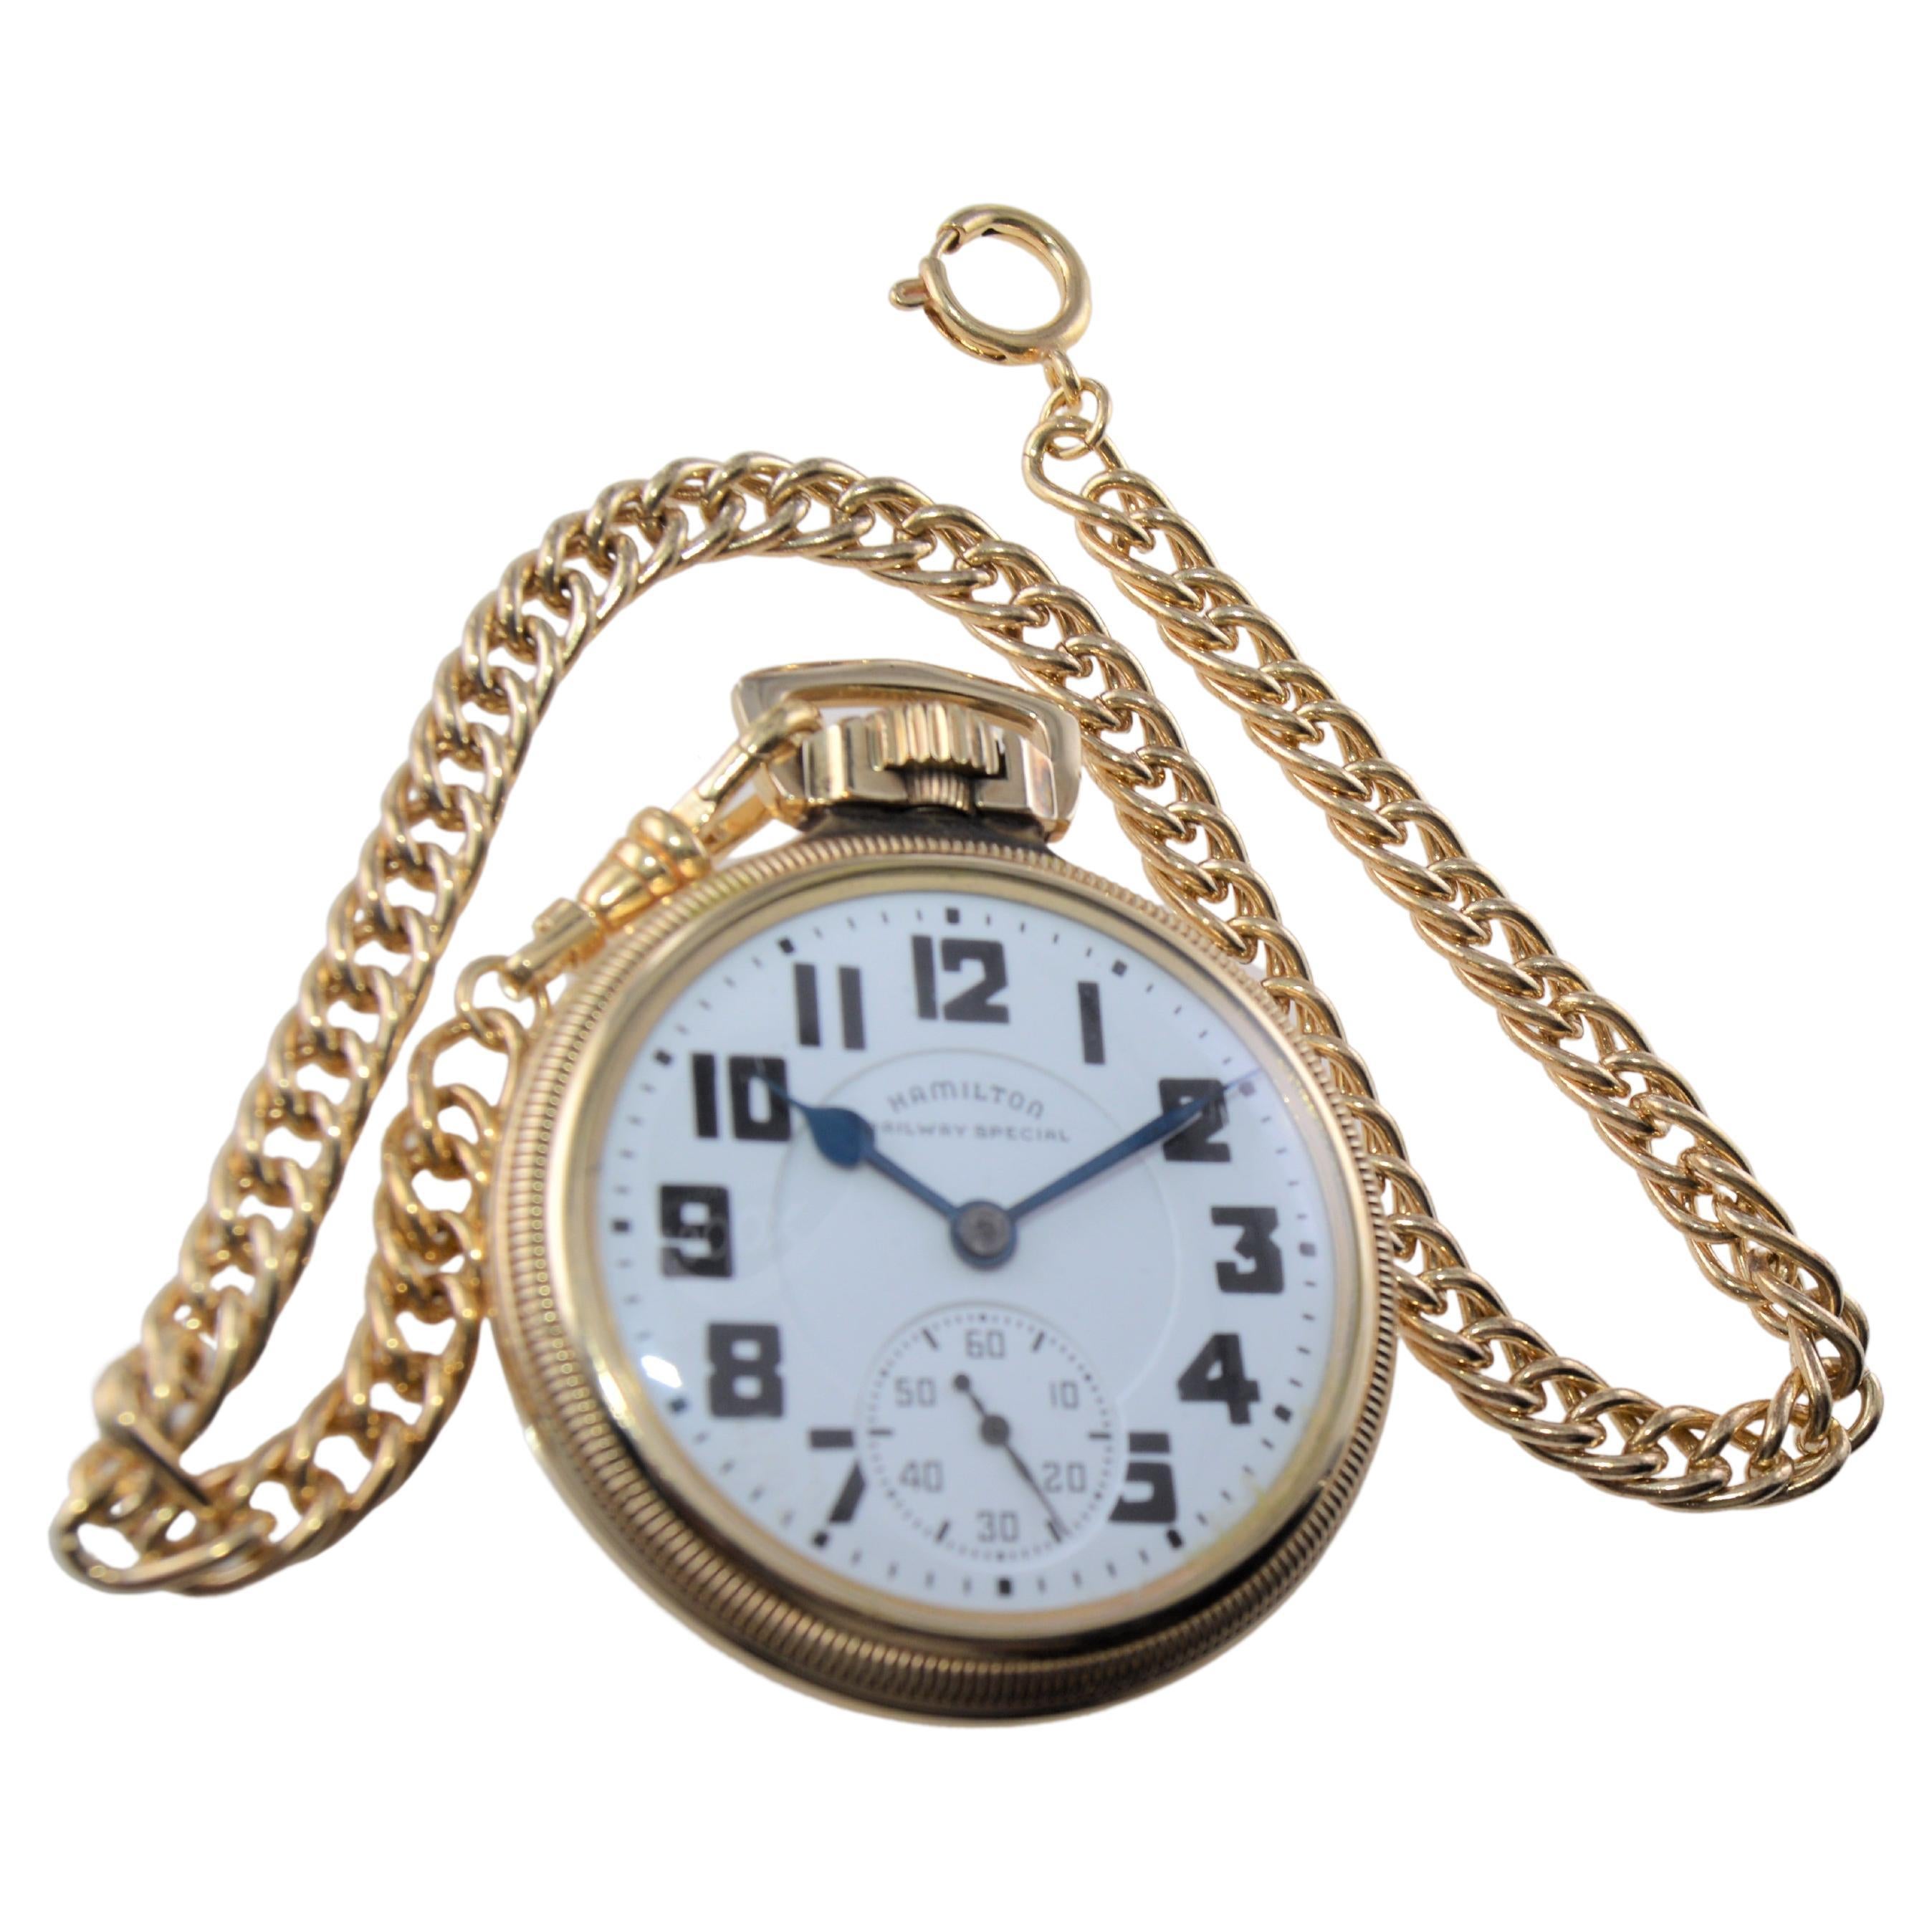 FACTORY / HOUSE: Hamilton Watch Company
STYLE / REFERENCE: Open Faced Pocket Watch
METAL / MATERIAL: Yellow Gold Filled
CIRCA / YEAR: 1940's
DIMENSIONS / SIZE: Diameter 57mm
MOVEMENT / CALIBER: Manual Winding / 21 Jewels / Caliber 992B
DIAL / HANDS: